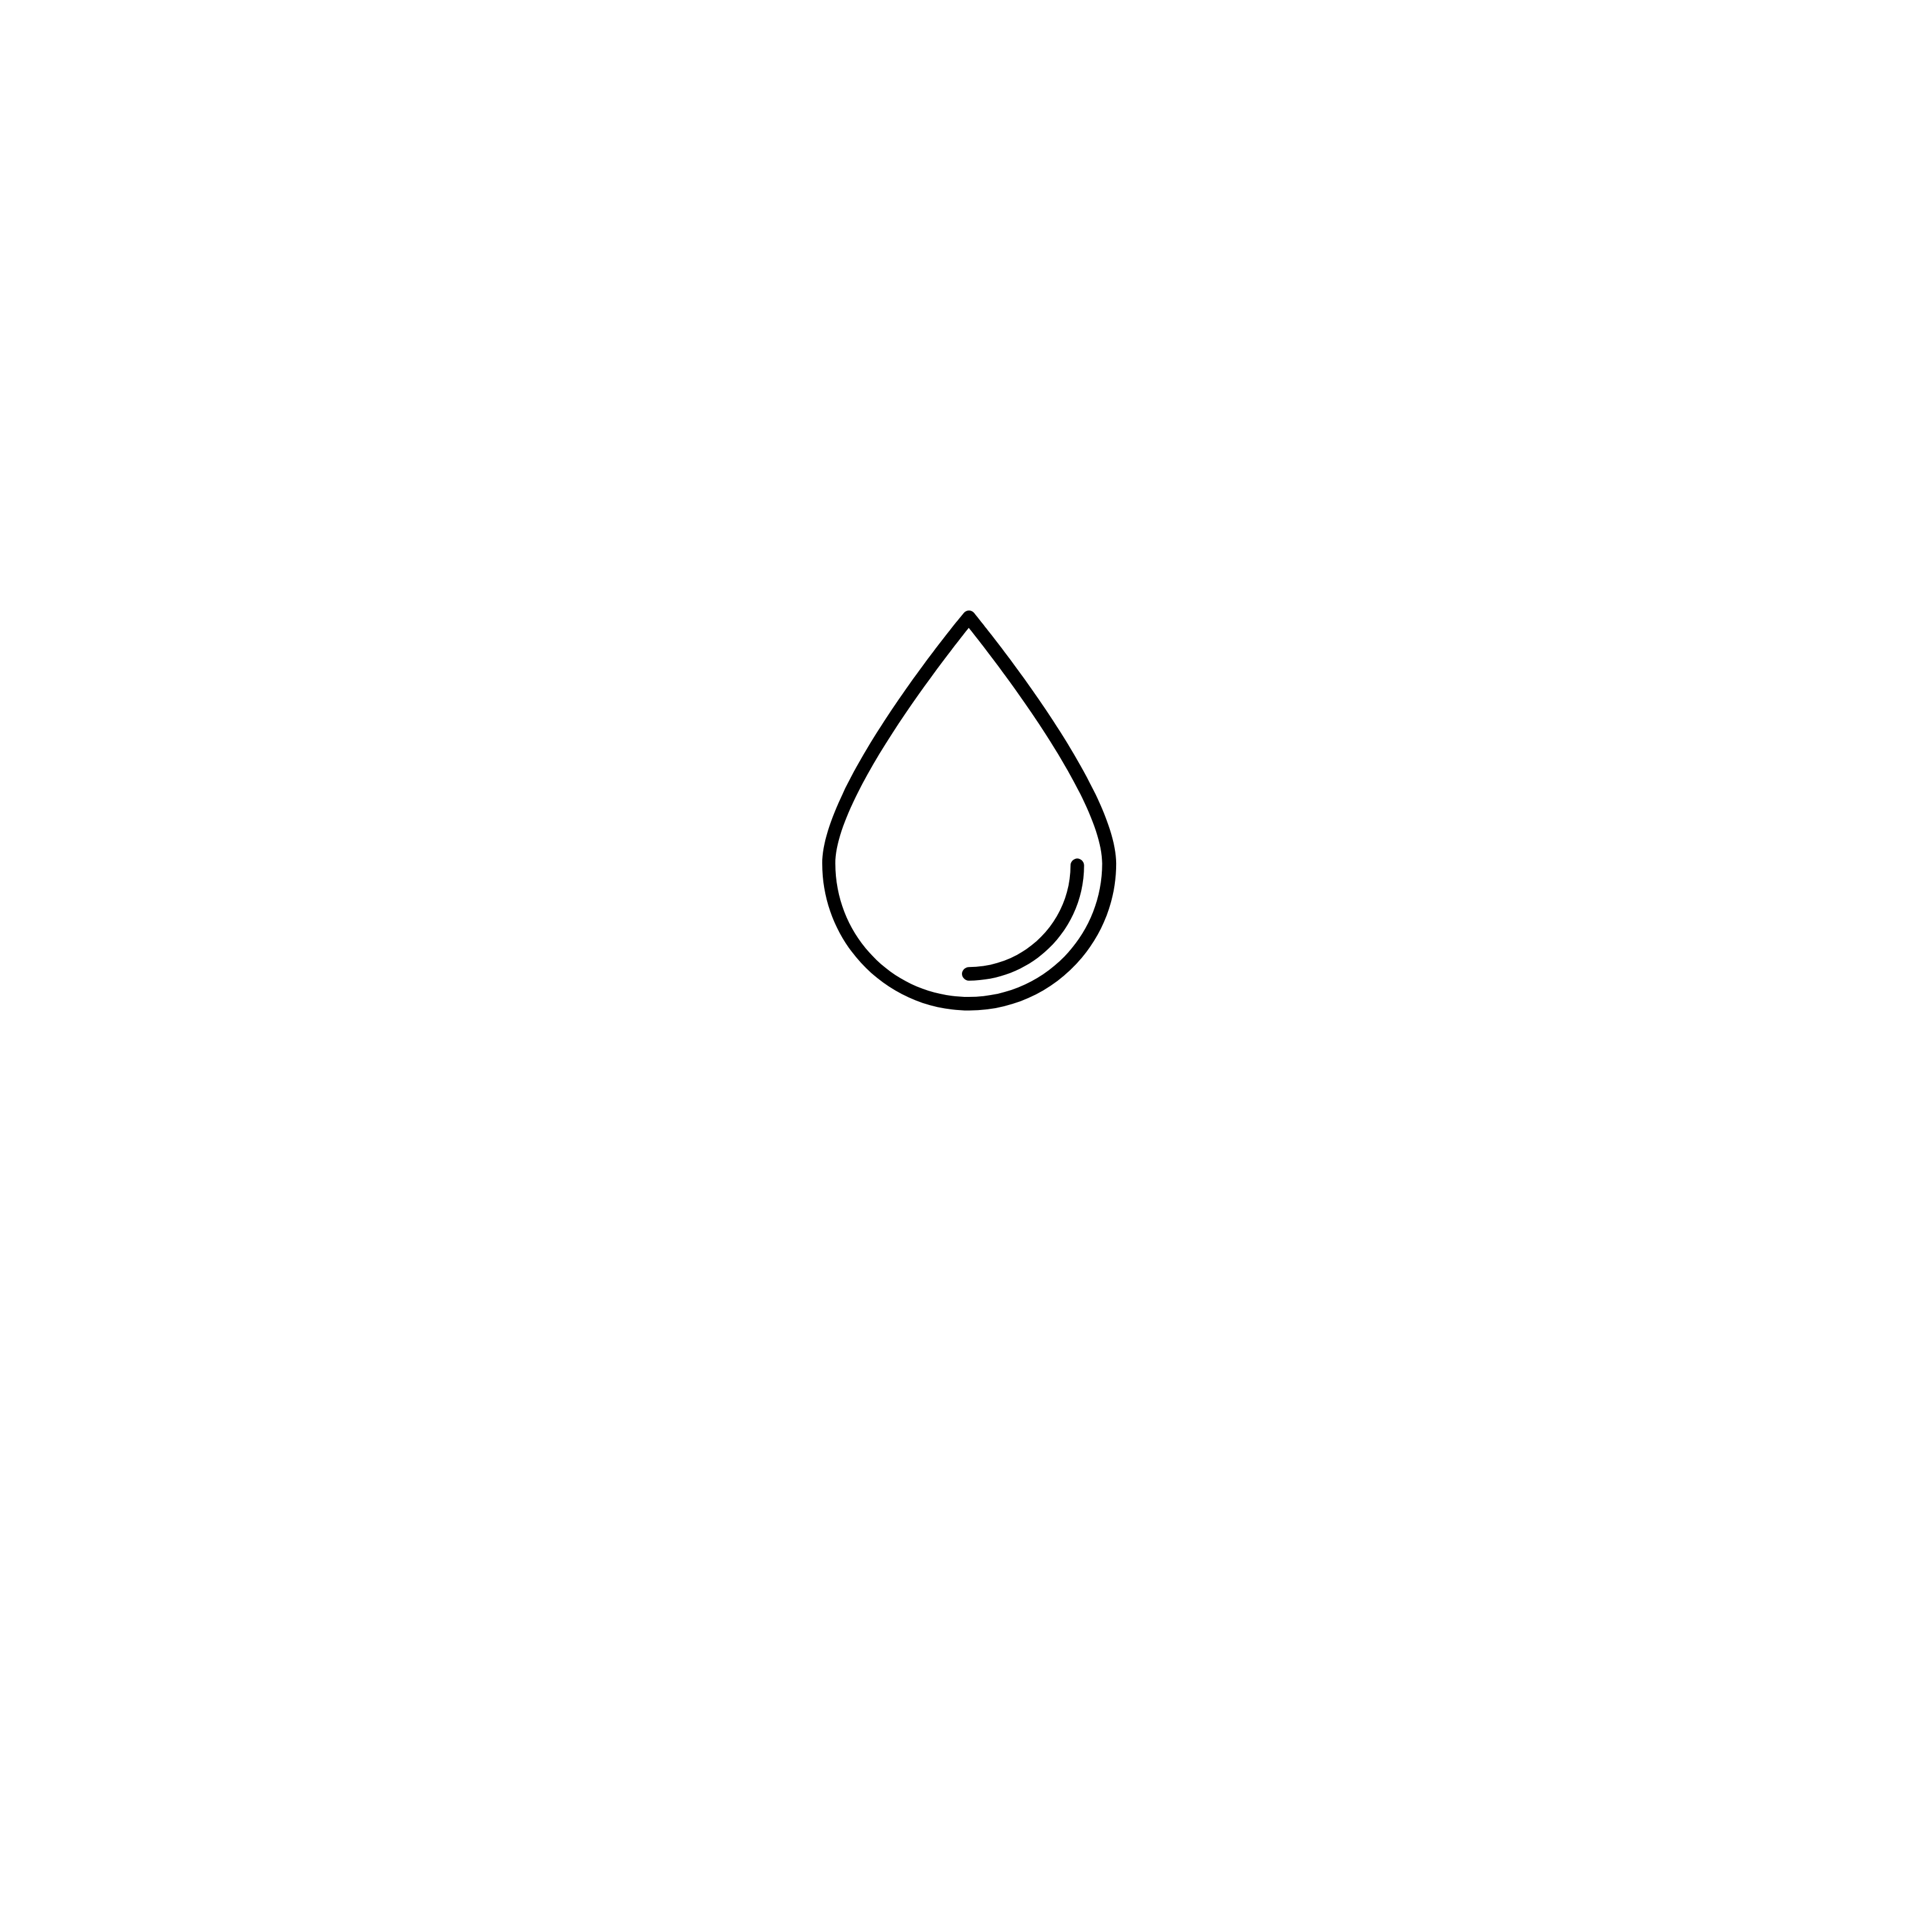 A black and white logo of the company vitalize iv.